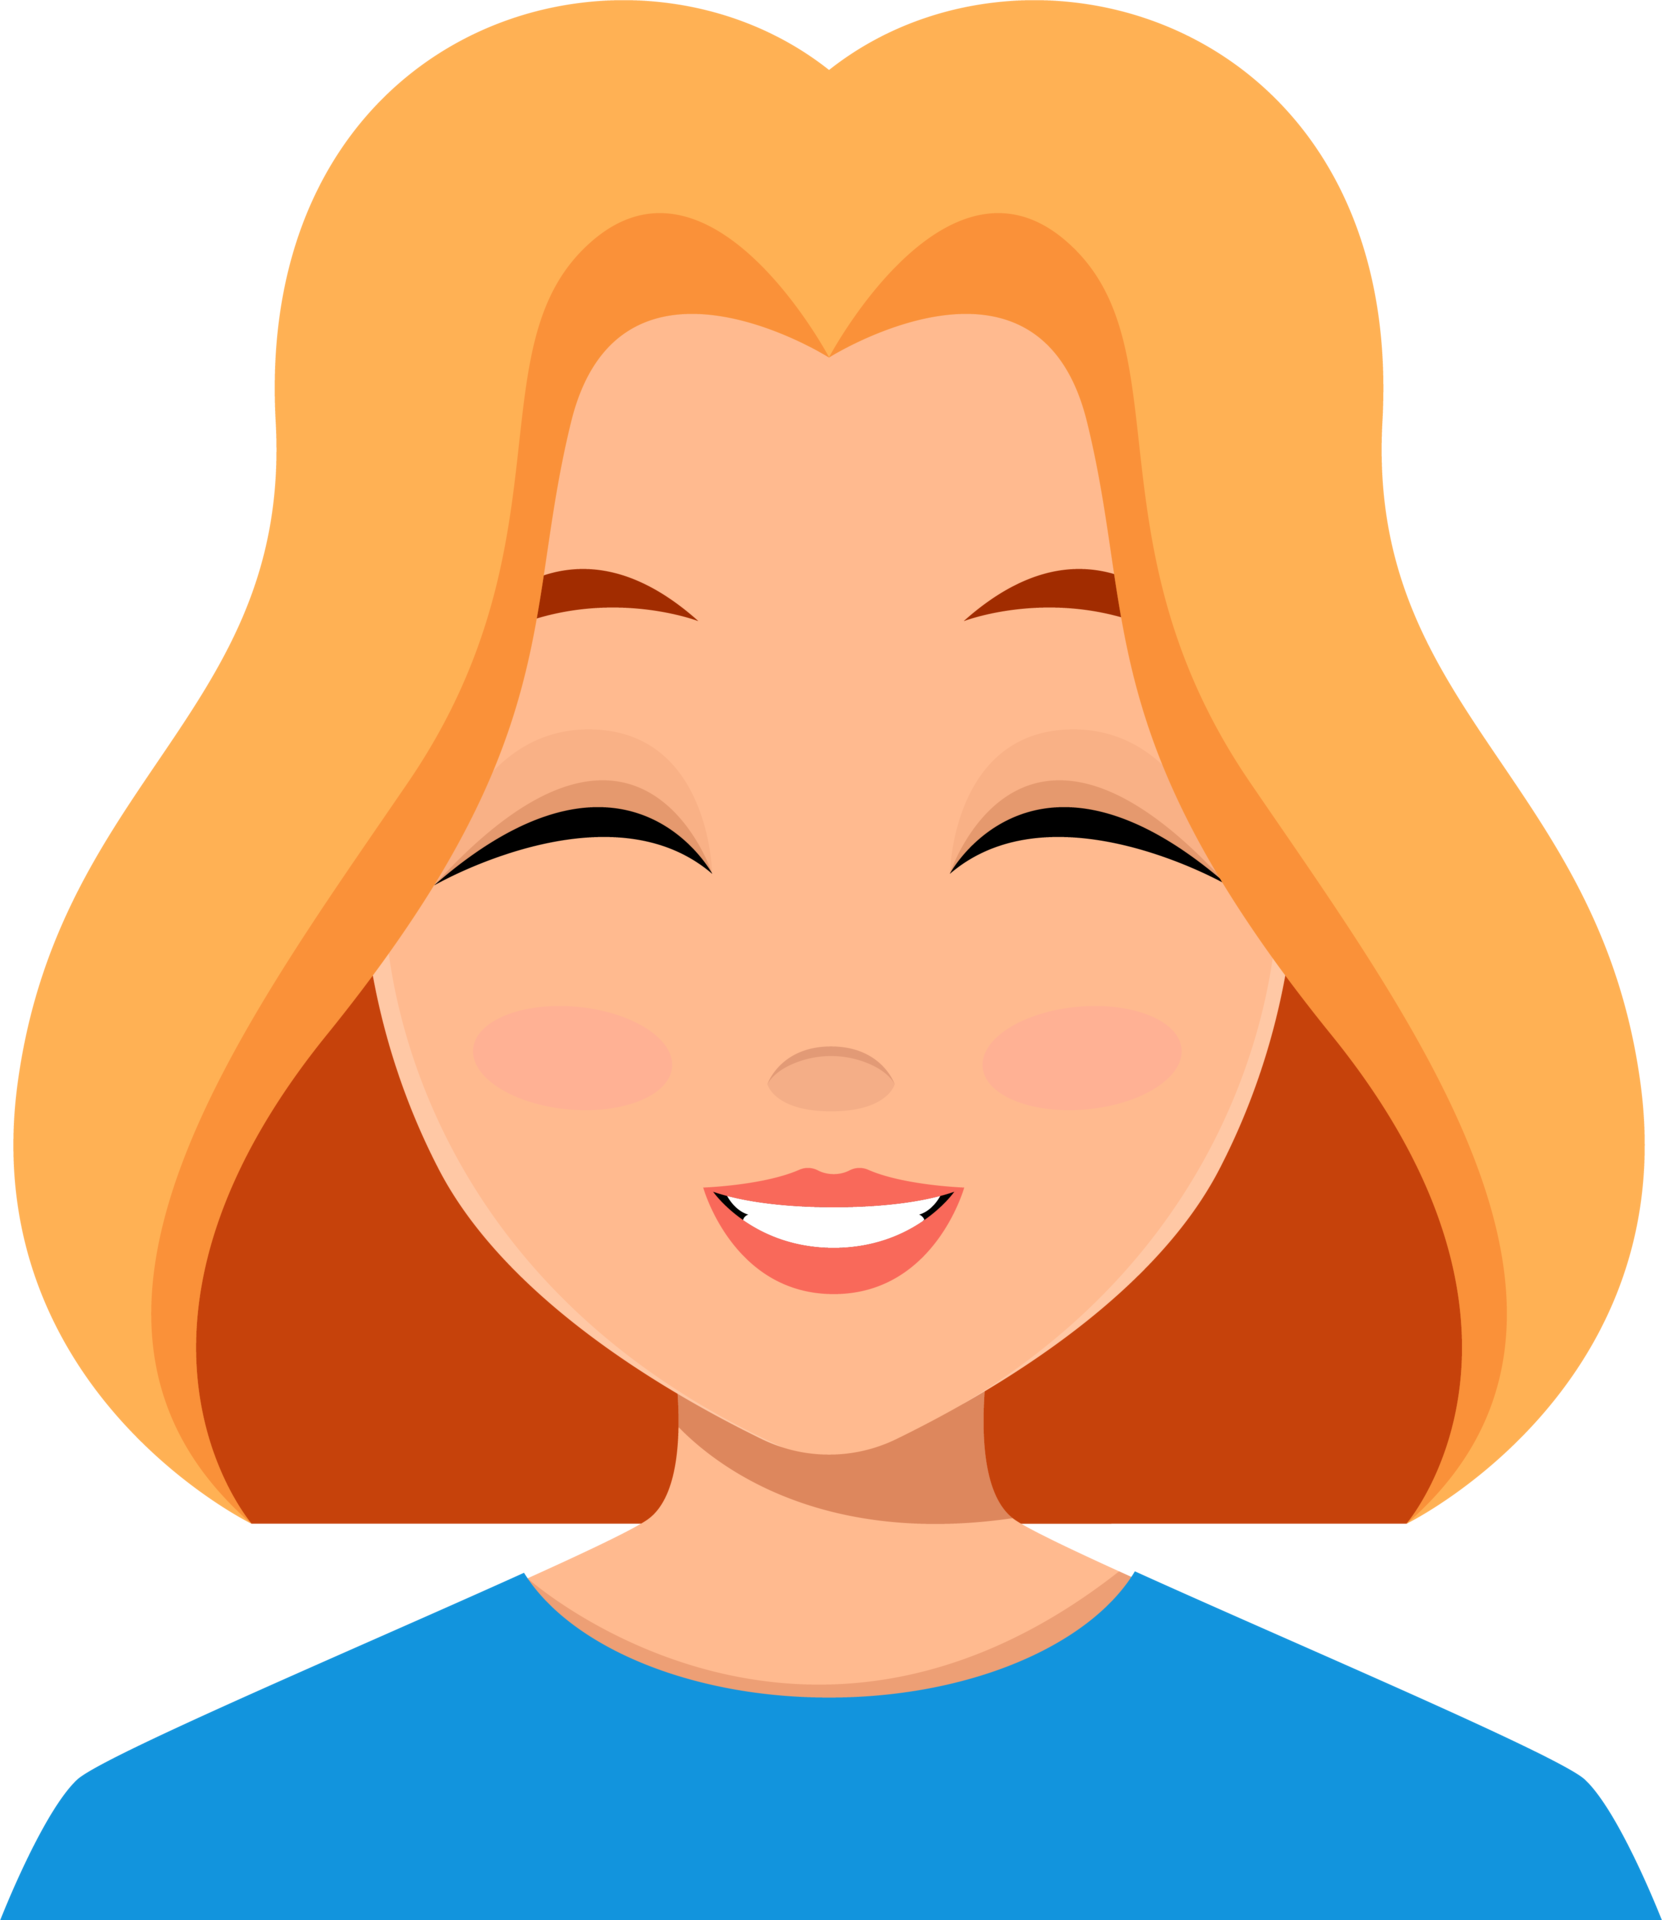 woman-face-expression-clipart-design-illustration-free-png